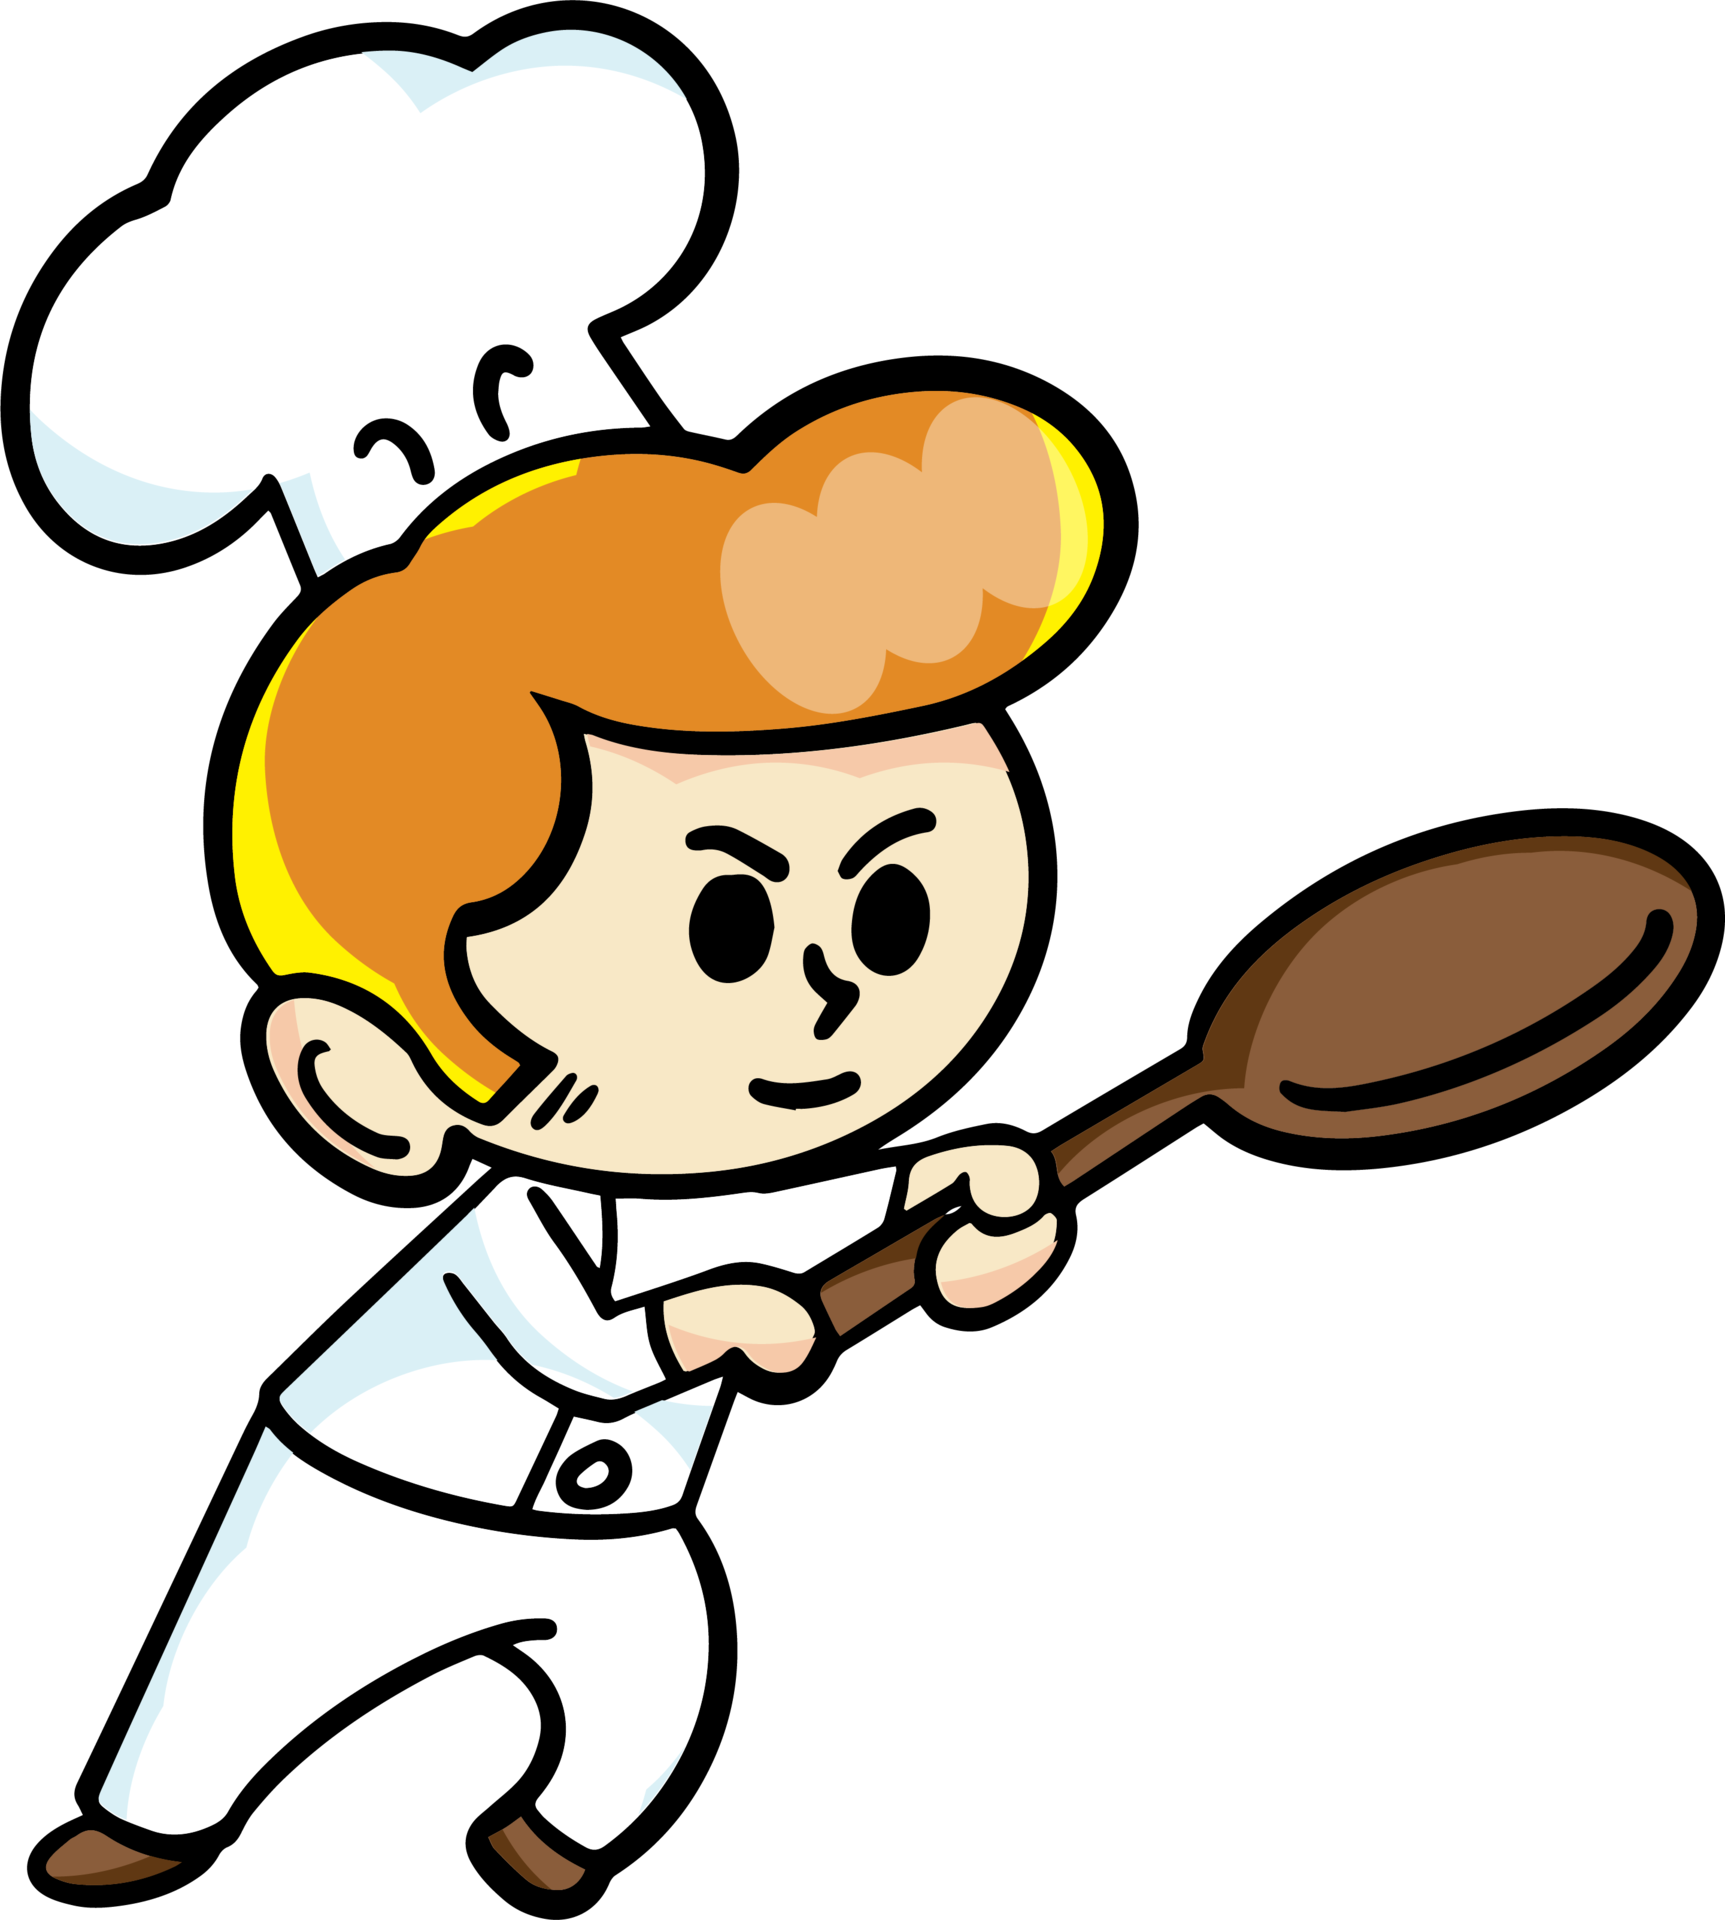 Free The chef cartoon character drawing design for food concept 17172696 PNG  with Transparent Background